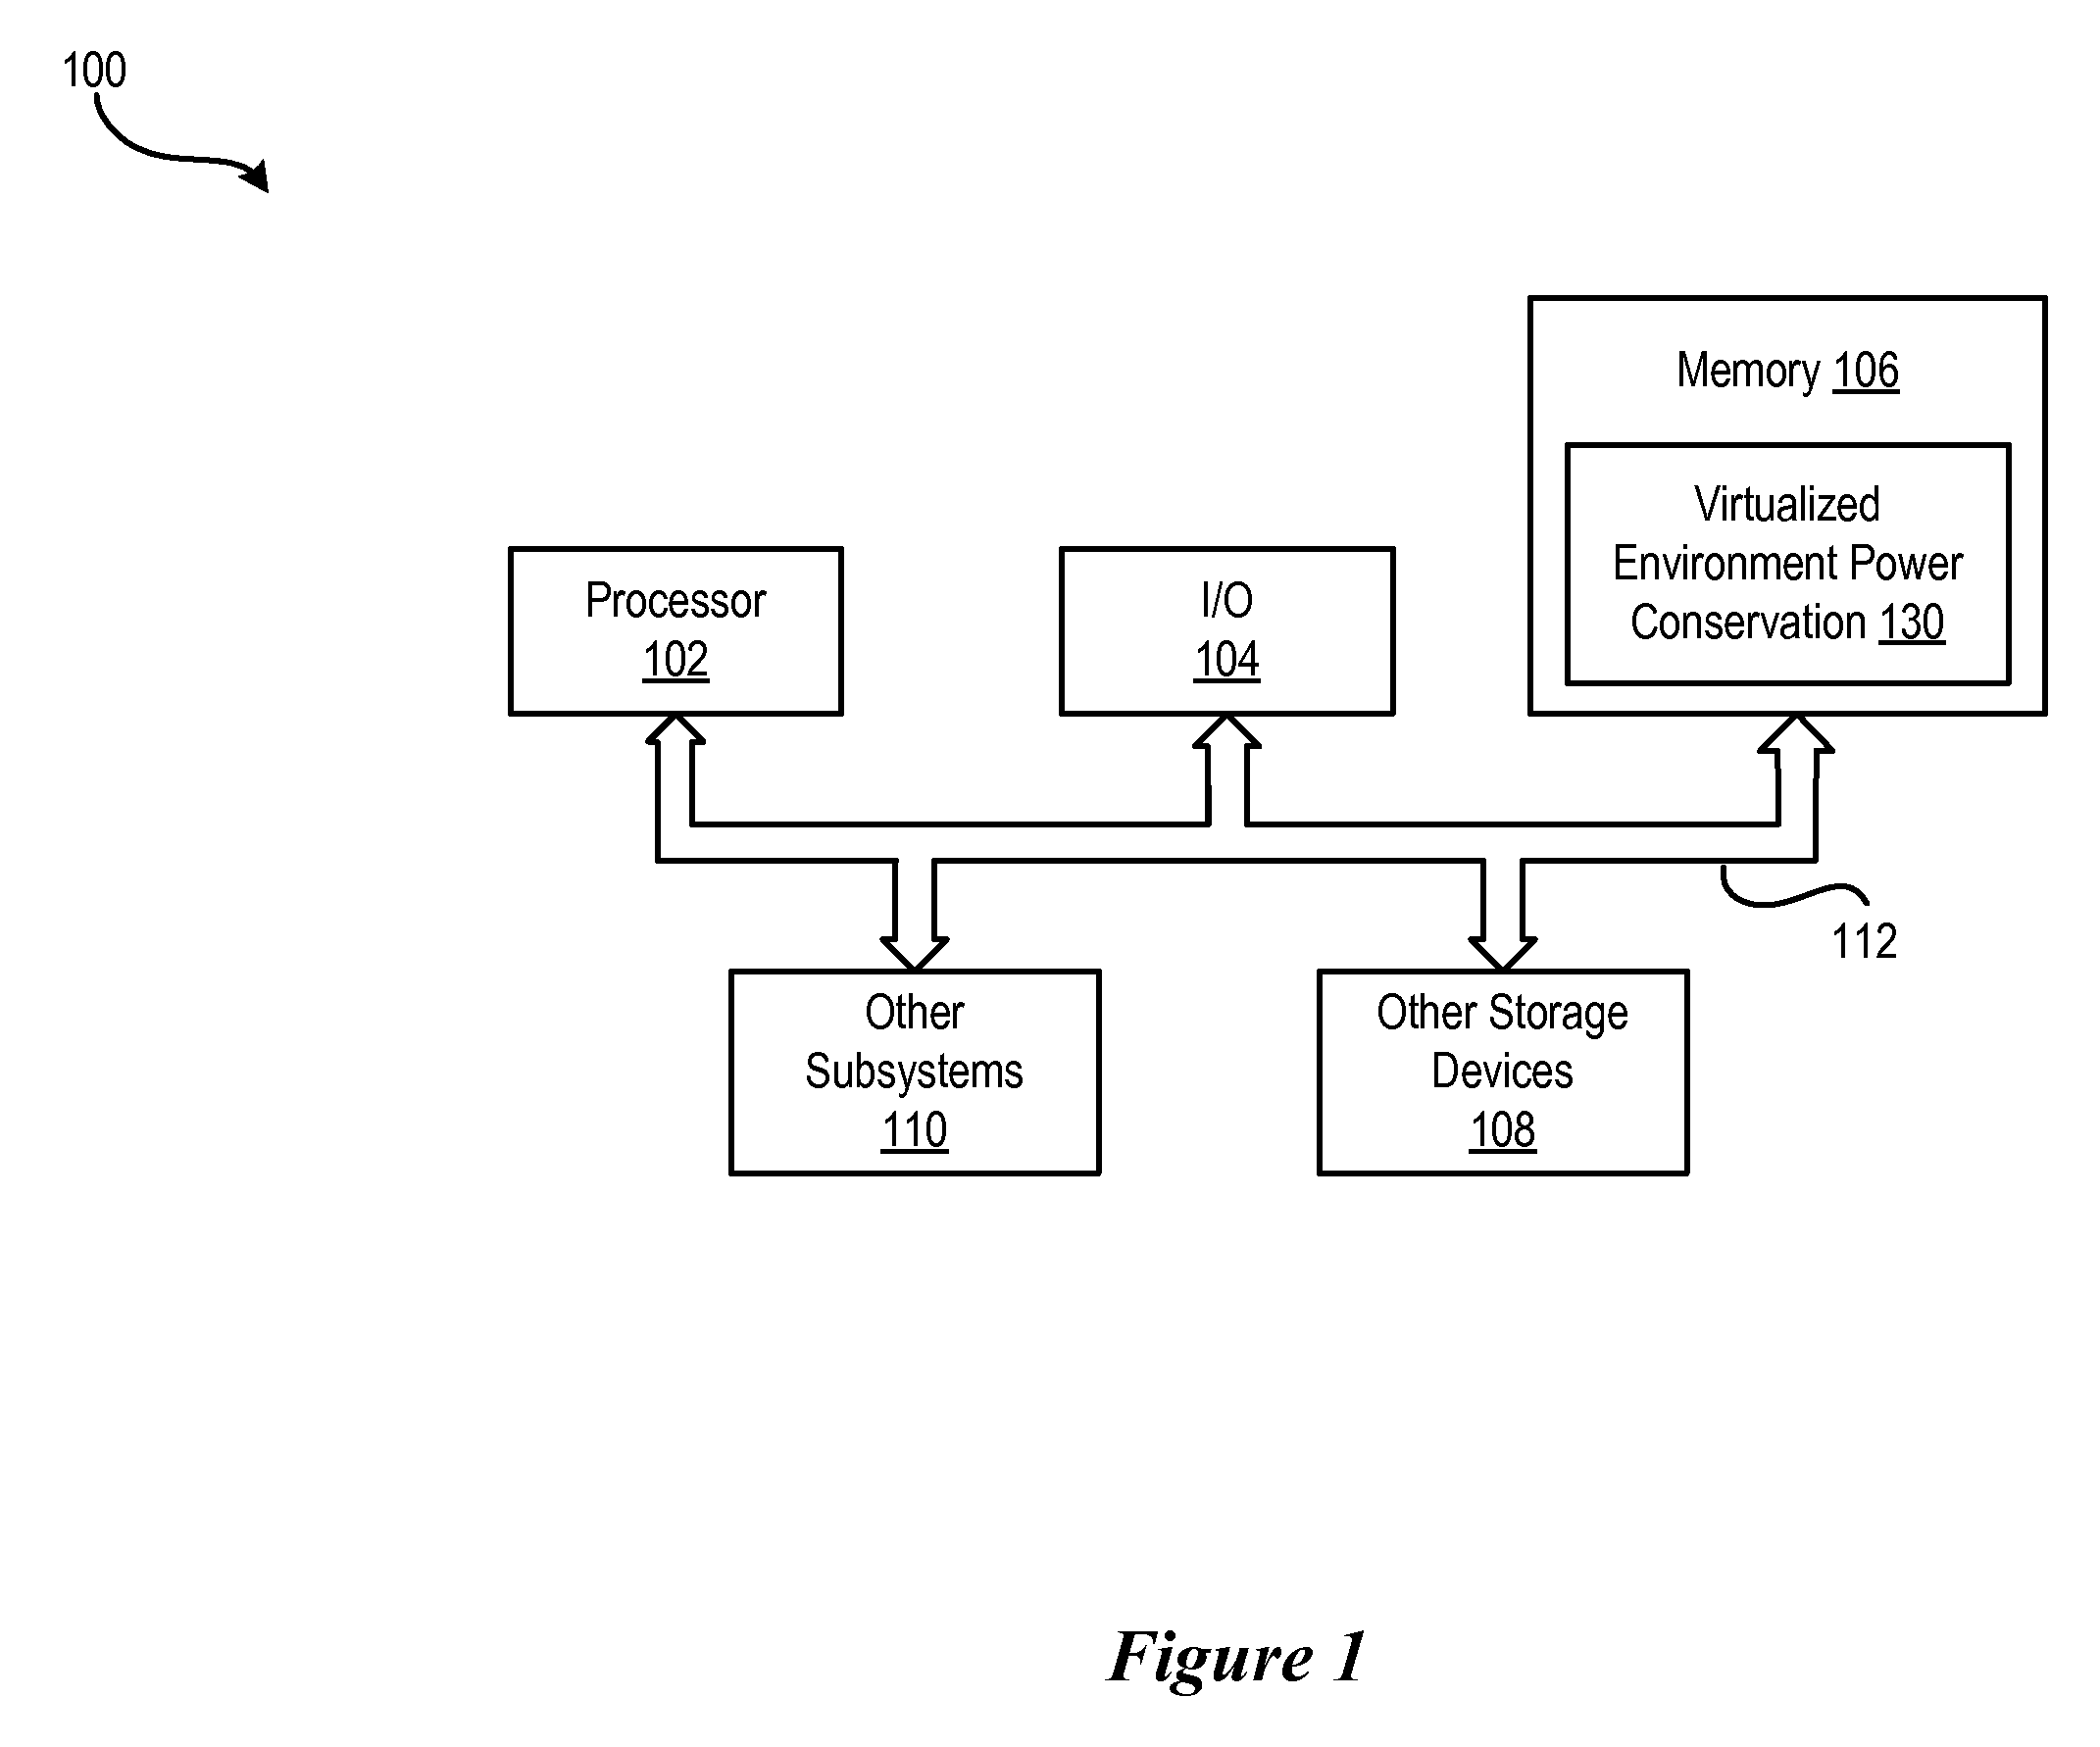 Method for Power Conservation in Virtualized Environments